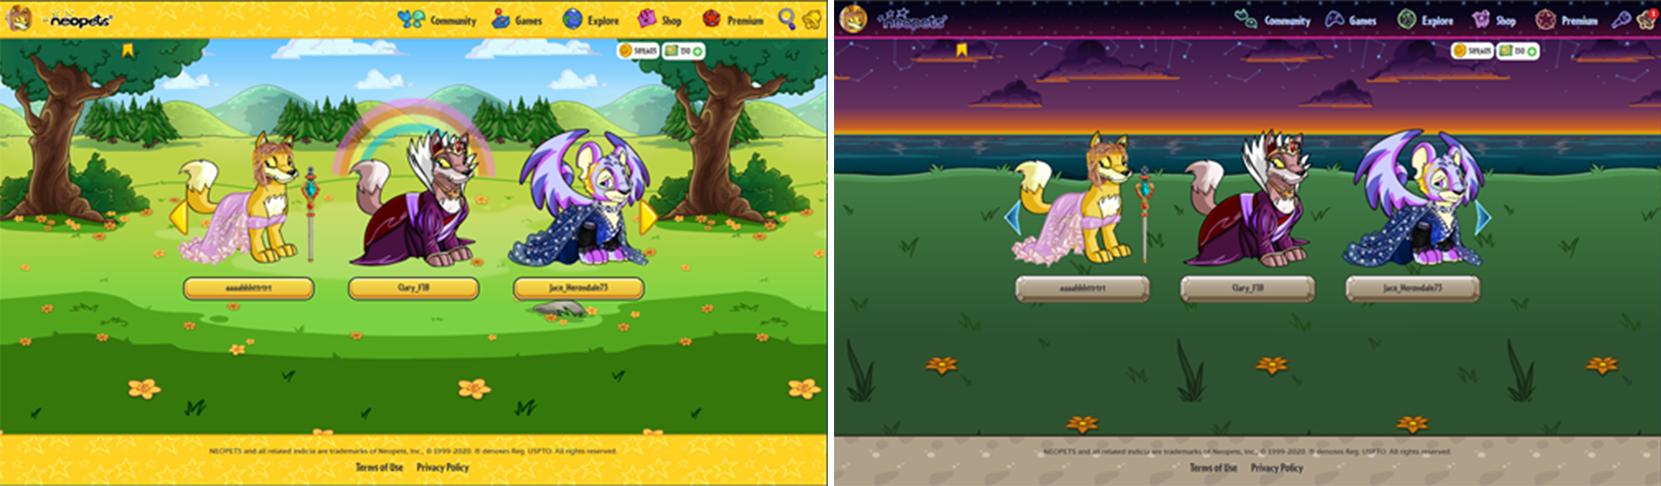 Neopets themes on mobile